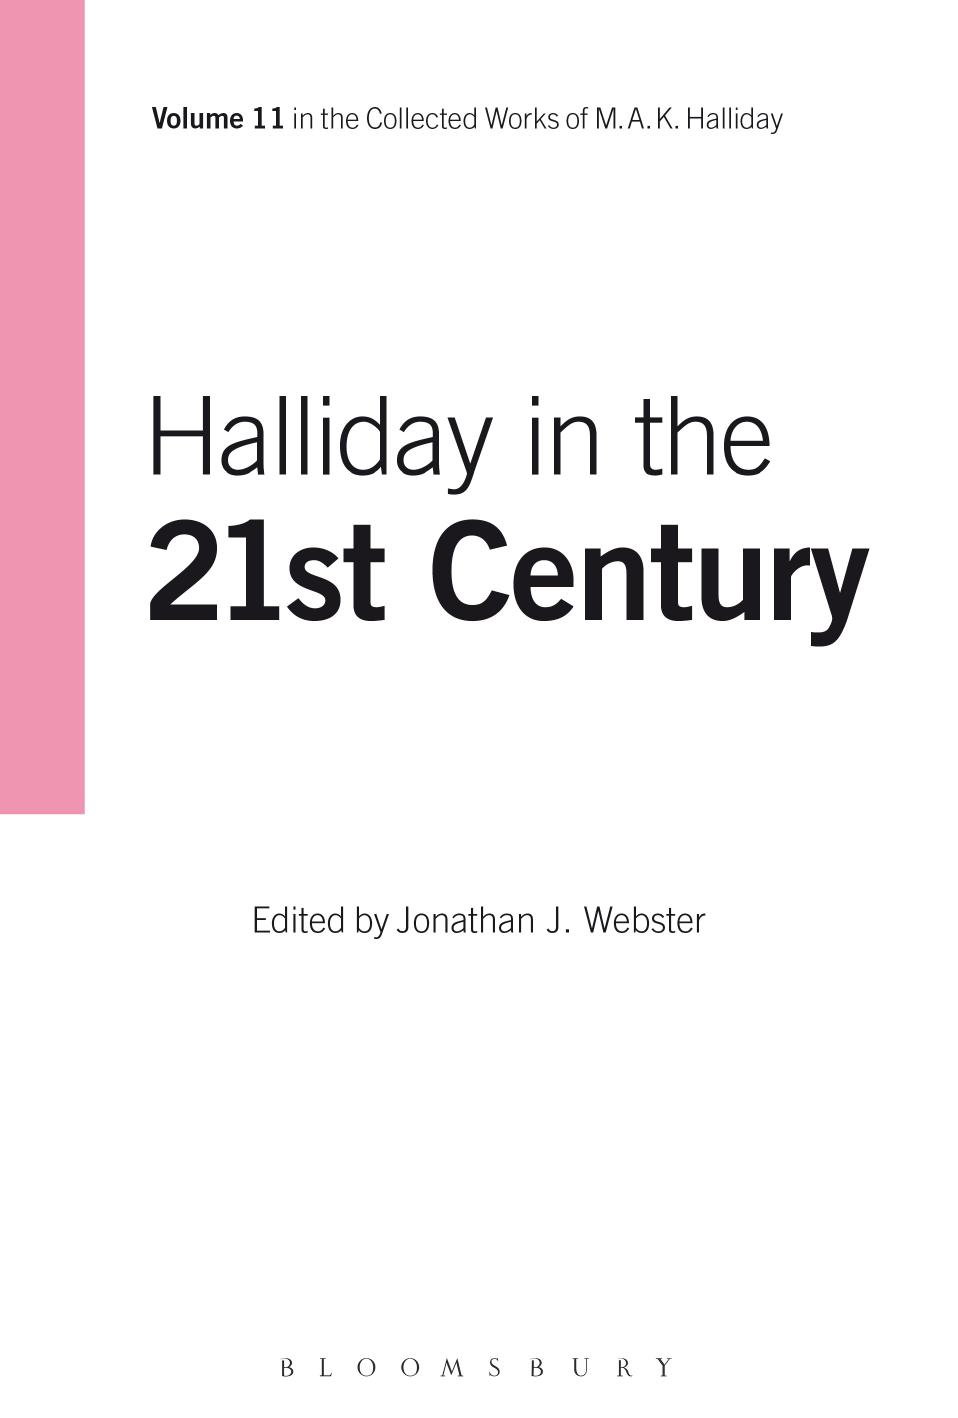 (eBook PDF)Halliday in the 21st Century: Volume 11 by M.A.K. Halliday,Jonathan J. Webster